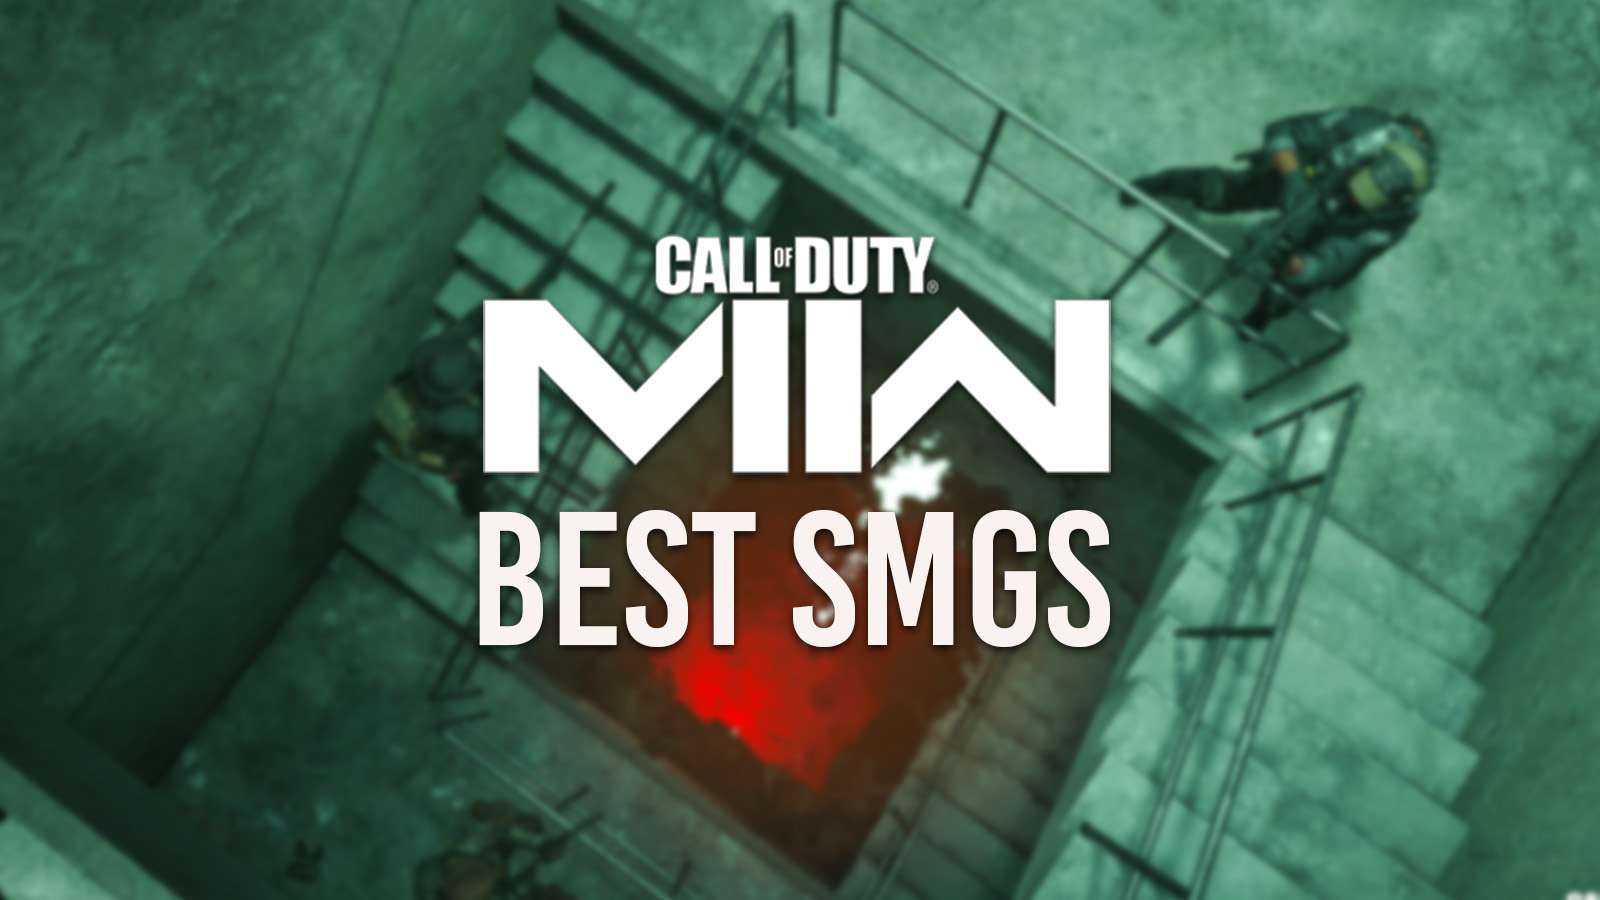 MW2 logo and 'Best SMGs' text on Modern Warfare 2 image